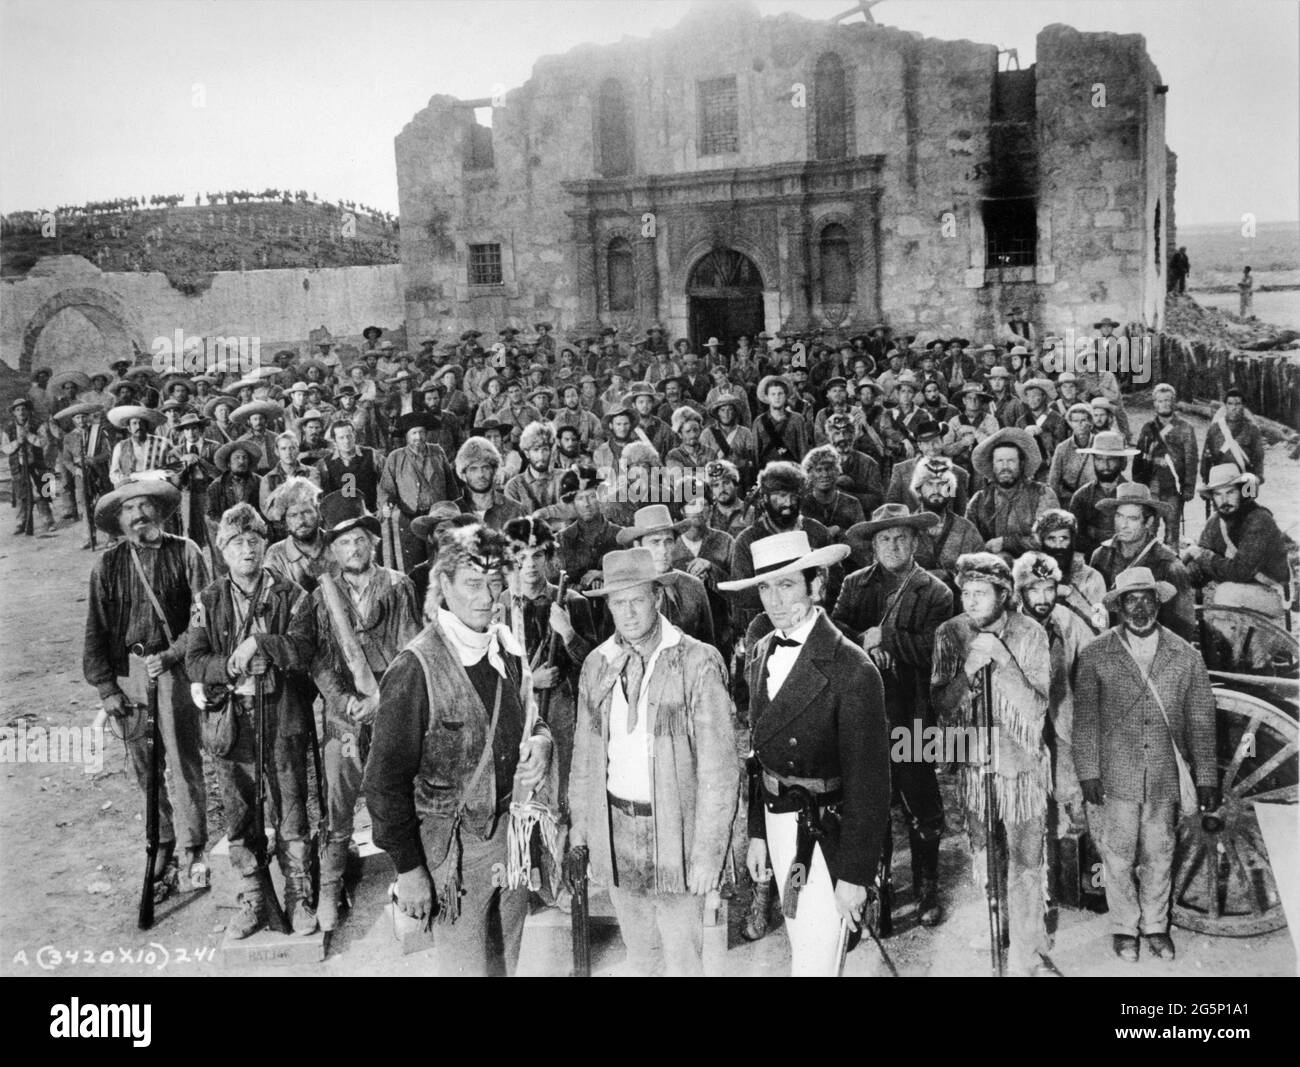 Cast Group photo with at front JOHN WAYNE as Colonel Davy Crockett RICHARD WIDMARK as Colonel Jim Bowie and LAURENCE HARVEY as Colonel William Barret Travis on set candid during filming of THE ALAMO 1960 director / producer JOHN WAYNE original screenplay James Edward Grant music Dimitri Tiomkin costume design Ron Talsky Batjac Productions / United Artists Stock Photo